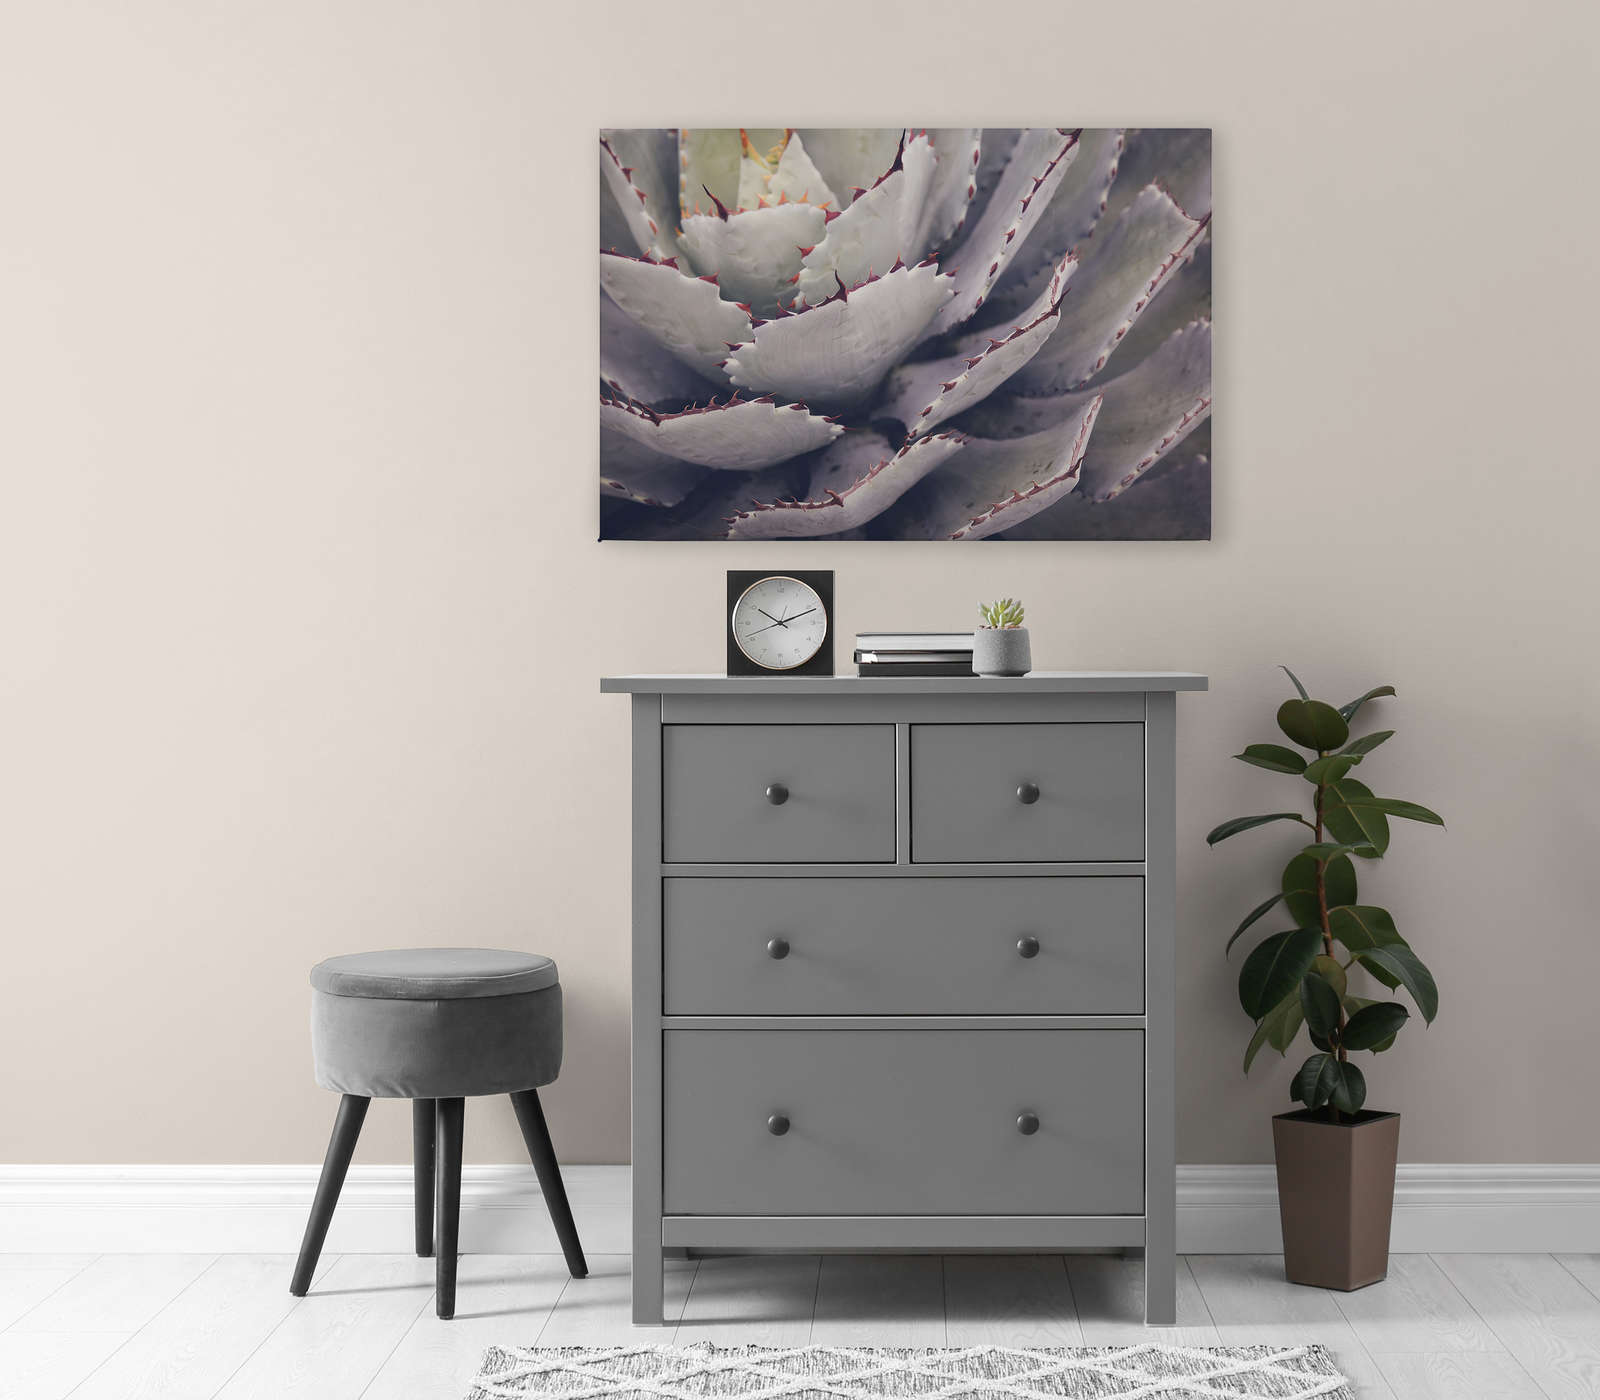             Canvas painting with close-up of a cactus - 0.90 m x 0.60 m
        